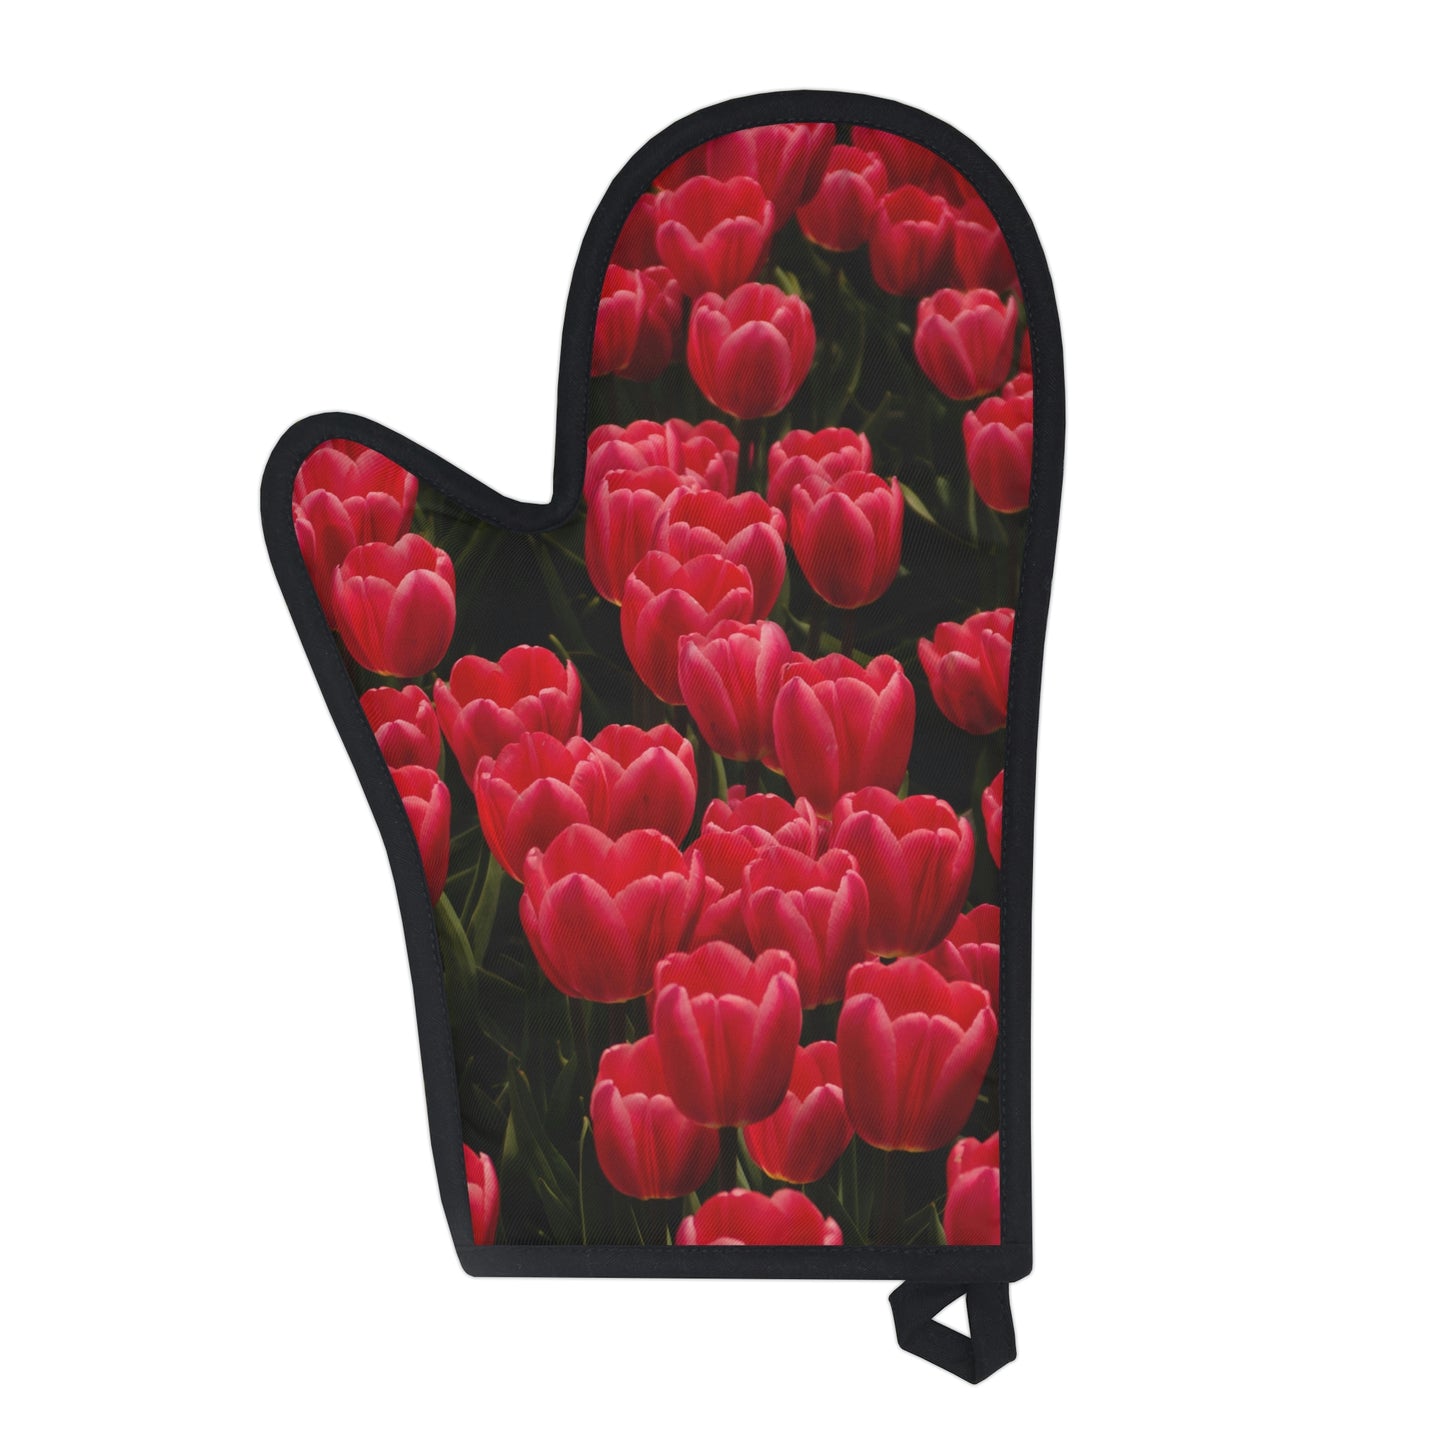 Flowers 23 Oven Glove